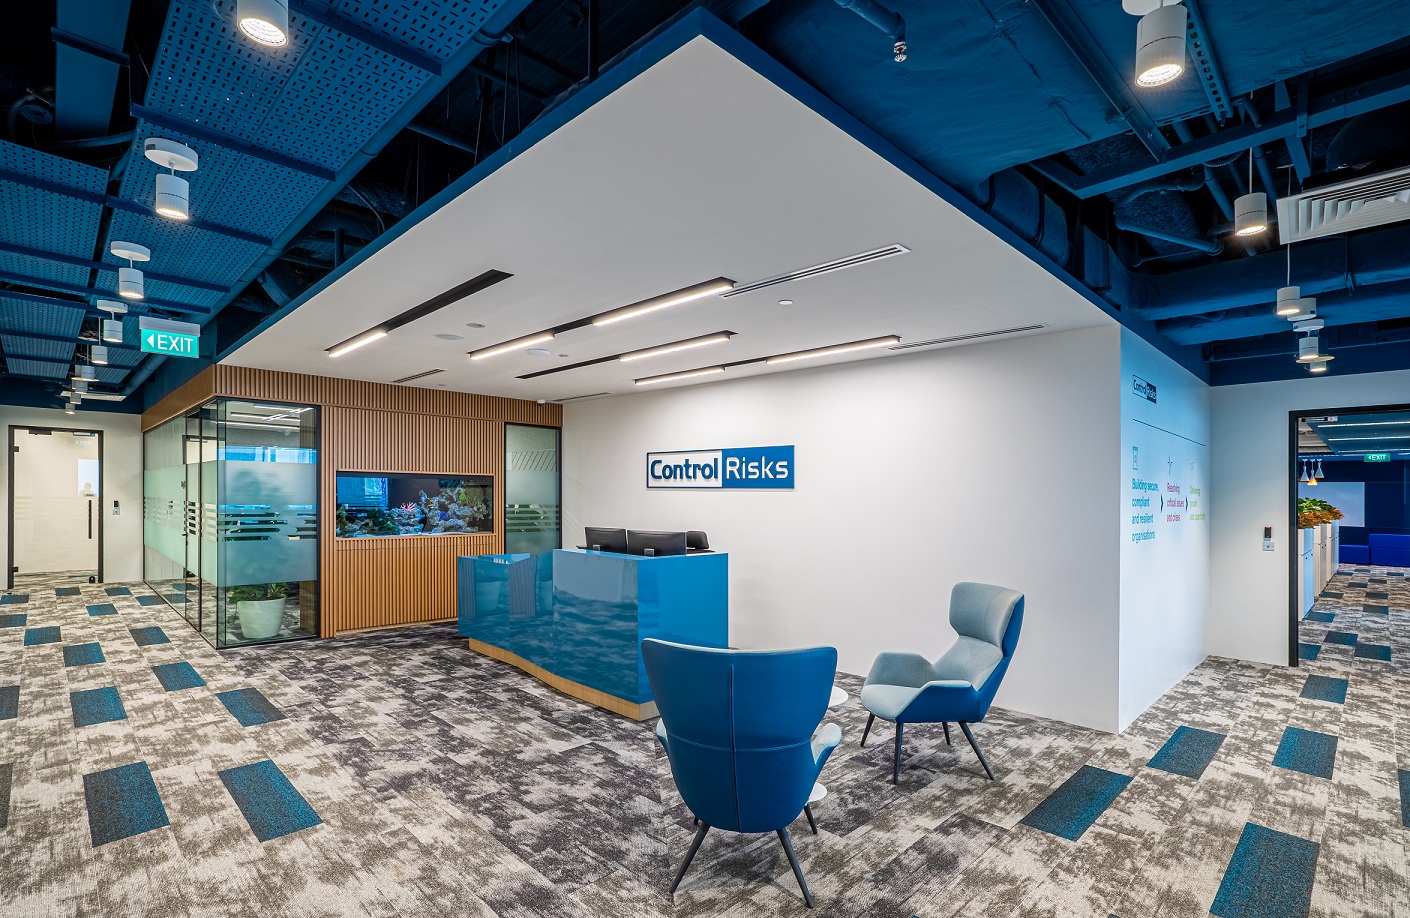 Control Risks transitioned to a new workplace strategy with the help of Space Matrix